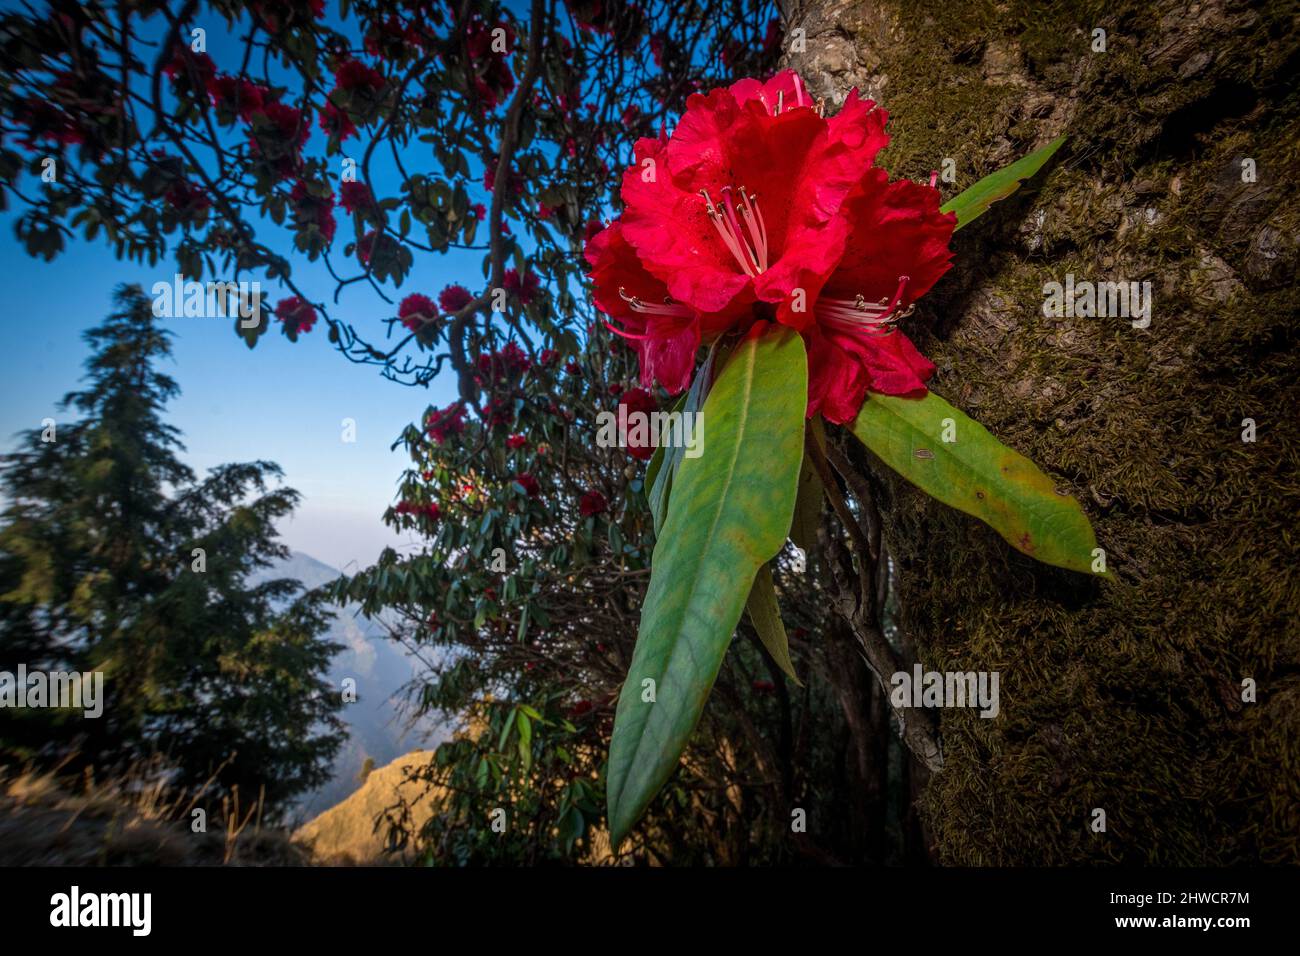 A red rhododendron flower blooms overlooking a valley in Pangot, Uttarakhand Stock Photo